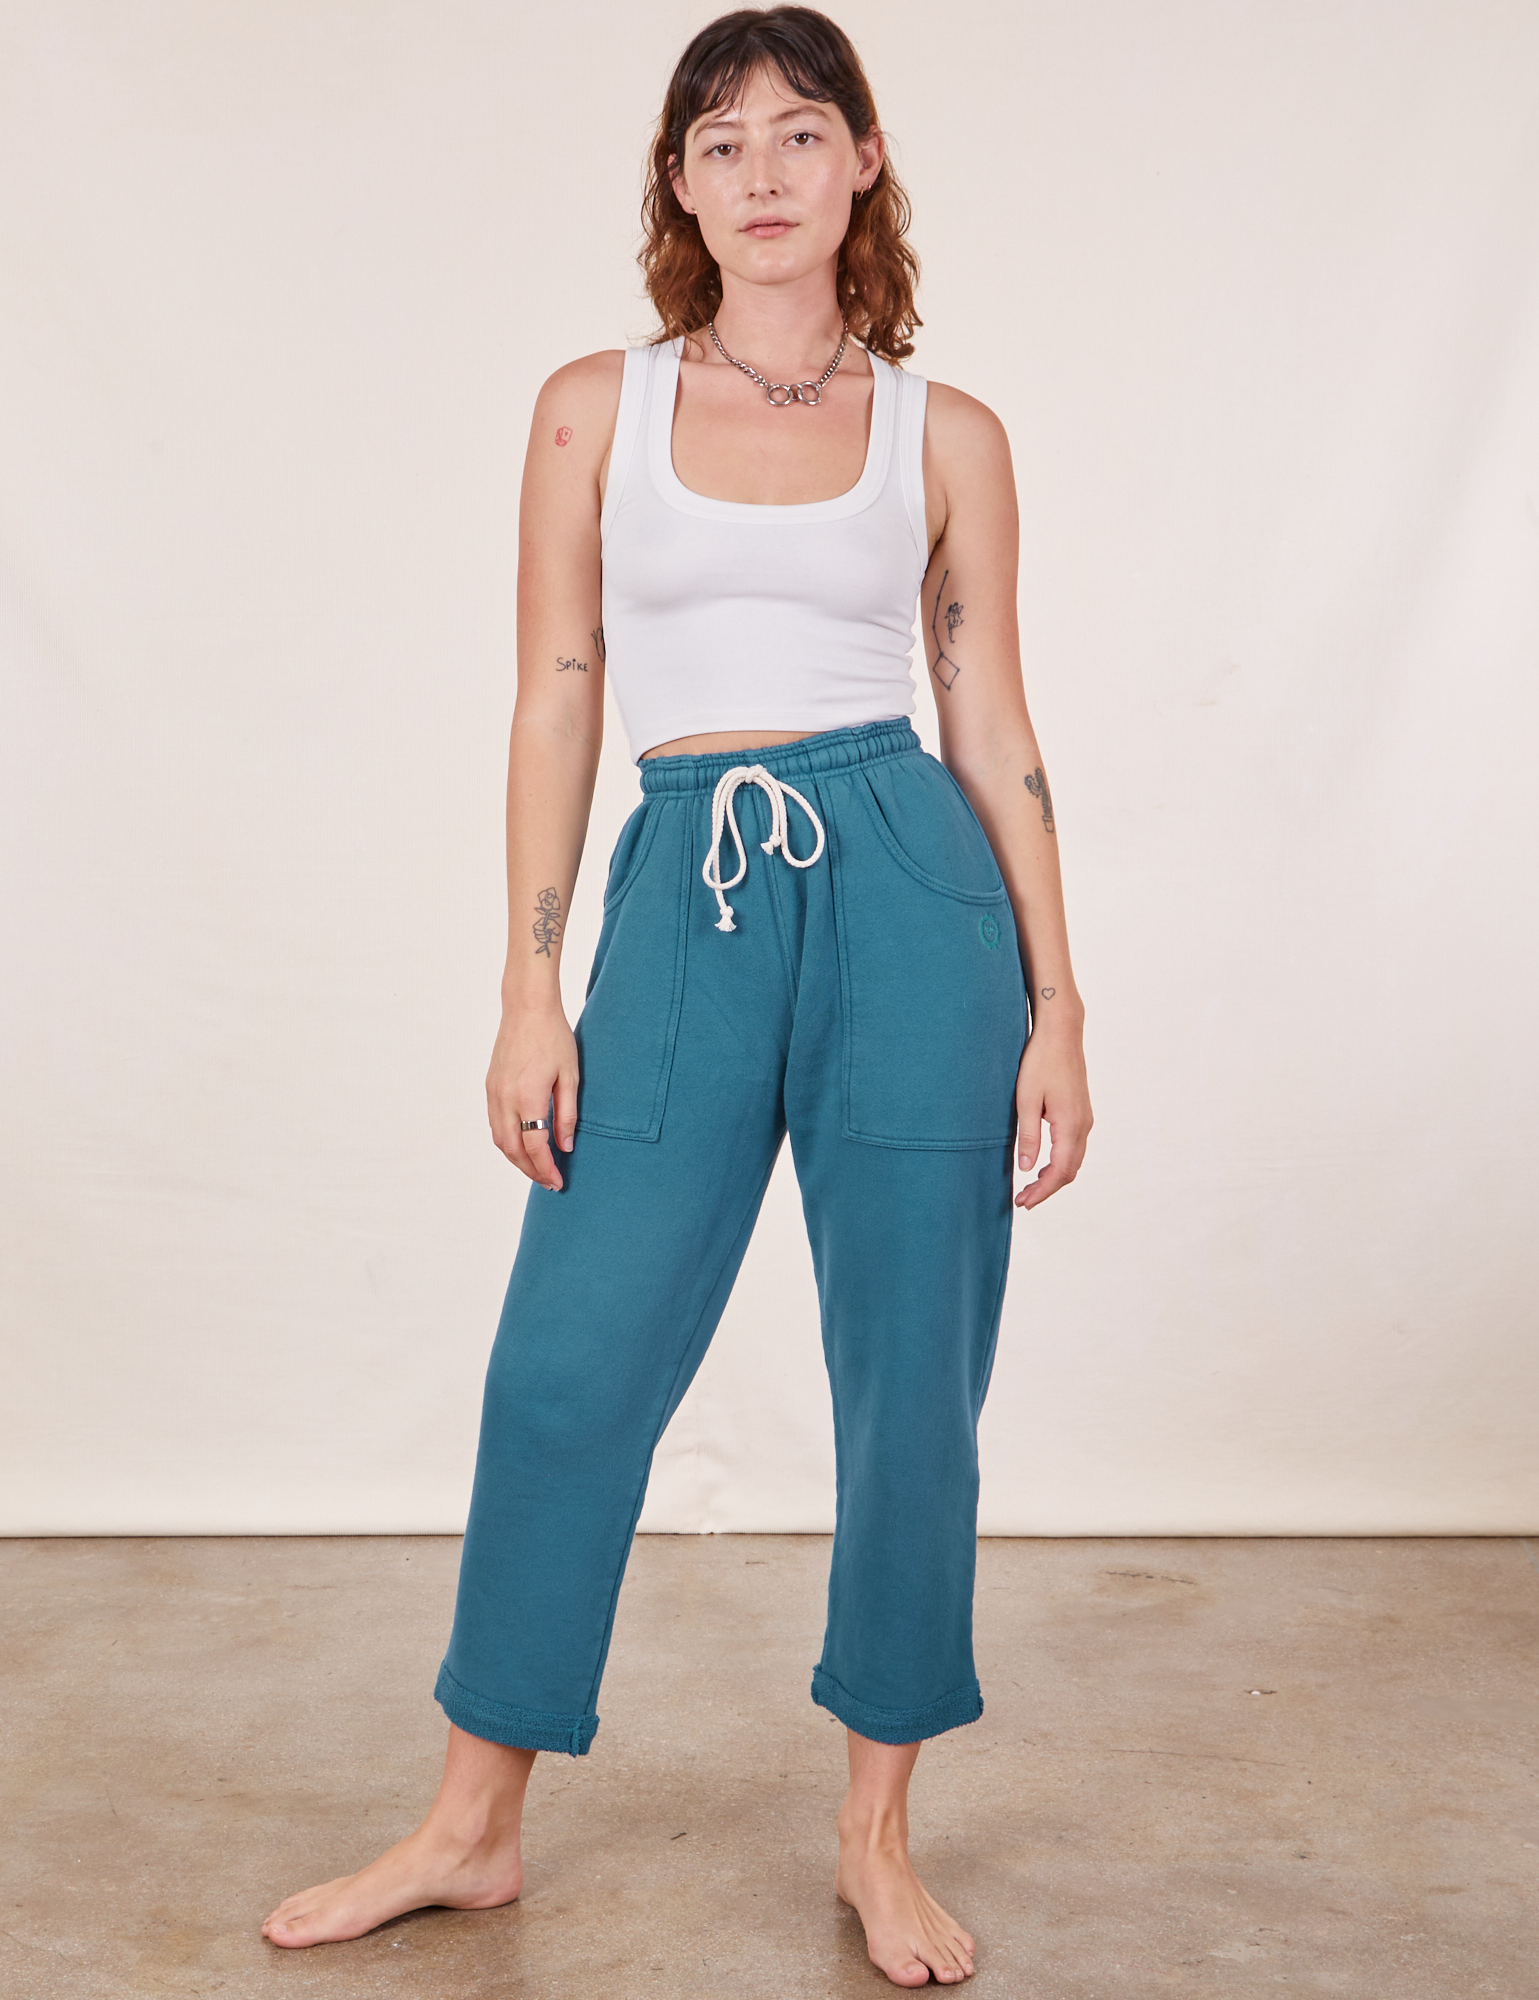 Alex is 5&#39;8&quot; and wearing XXS Cropped Rolled Cuff Sweatpants in Marine Blue